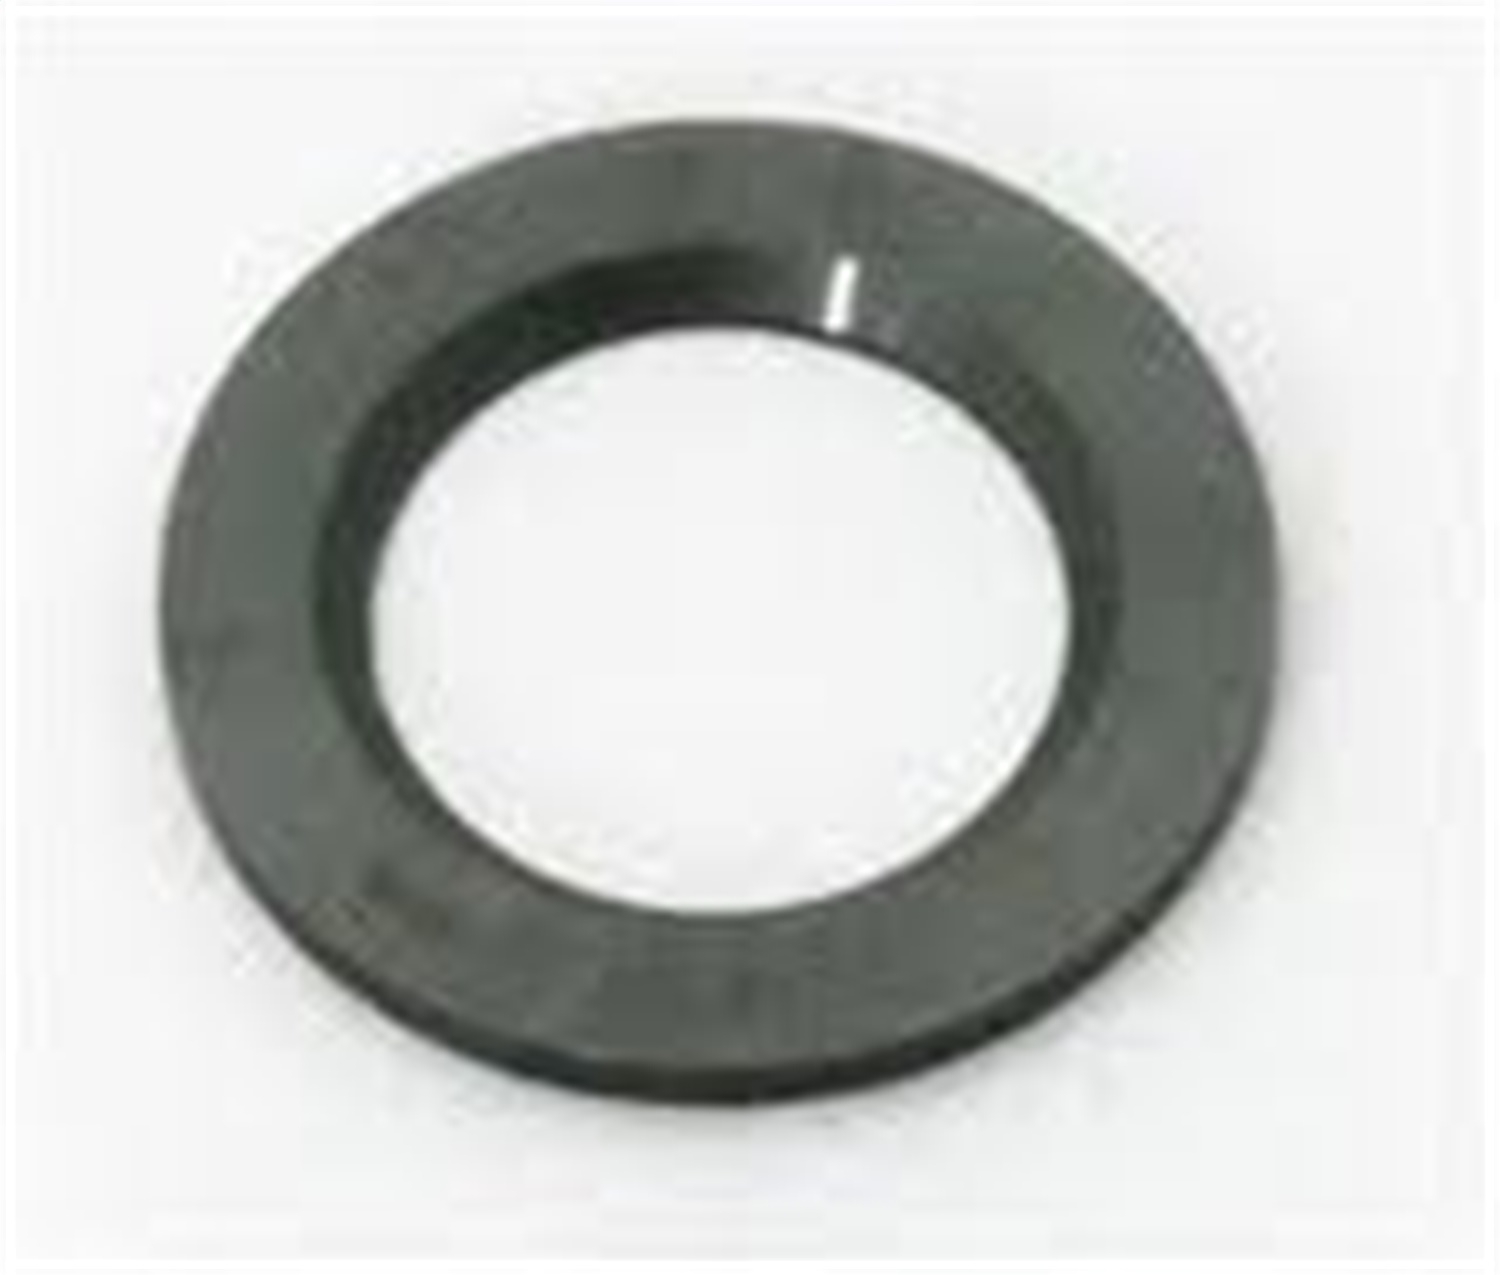 Omix This Plastic Spindle Thrust Washer From Omix Fits The Dana 30 Front Axle On 77-86 Jeep Cj